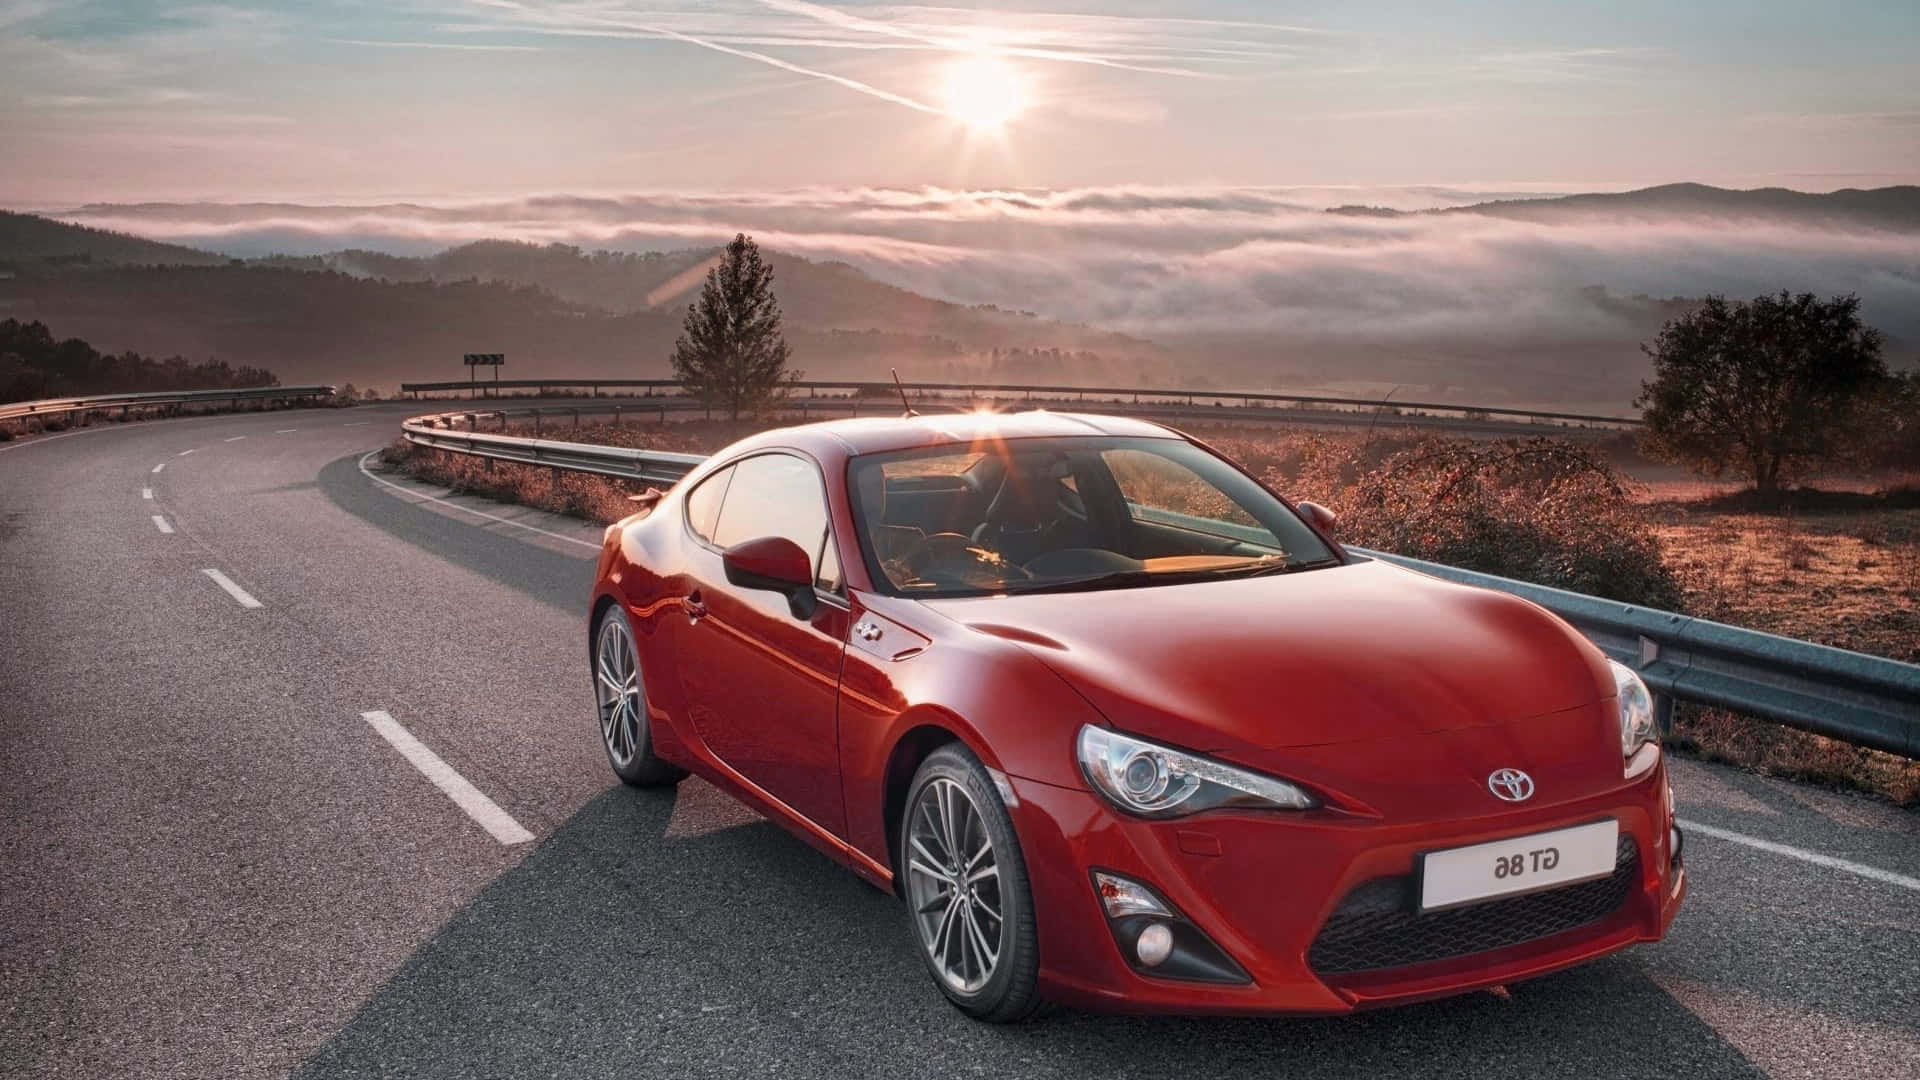 the red toyota 86 is driving down a road Wallpaper